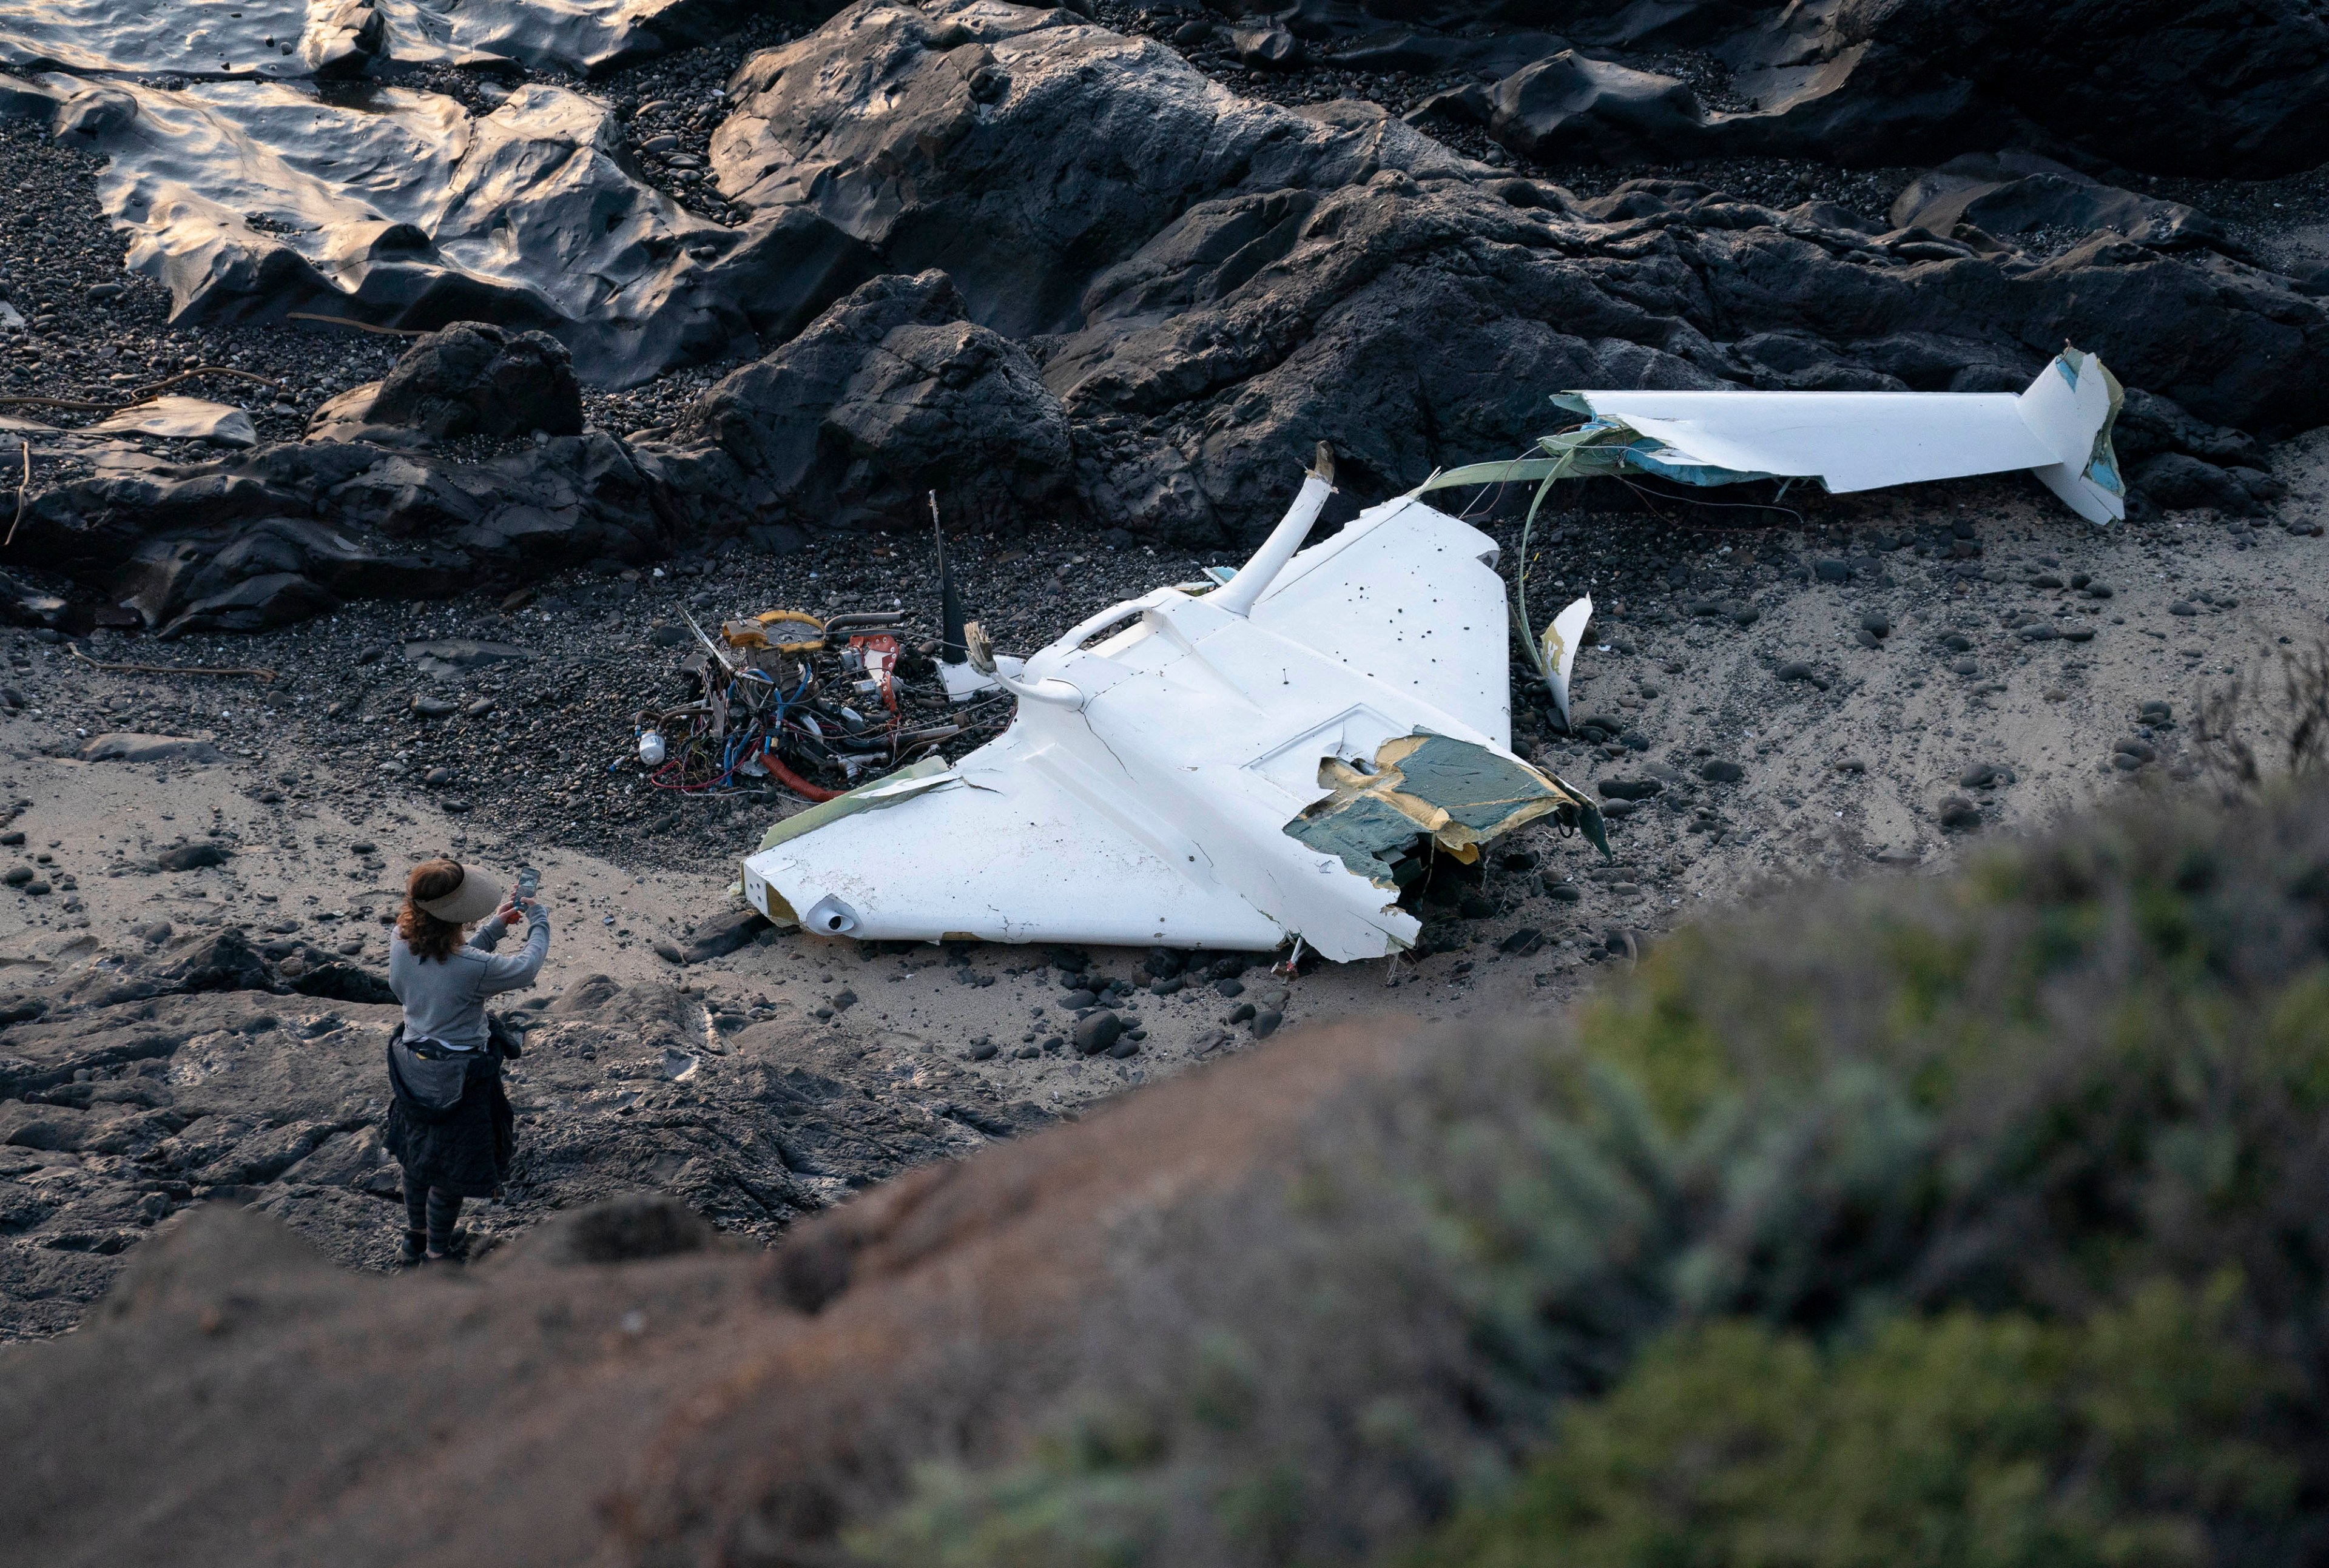 The shell of a wrecked plane lies on a beach.